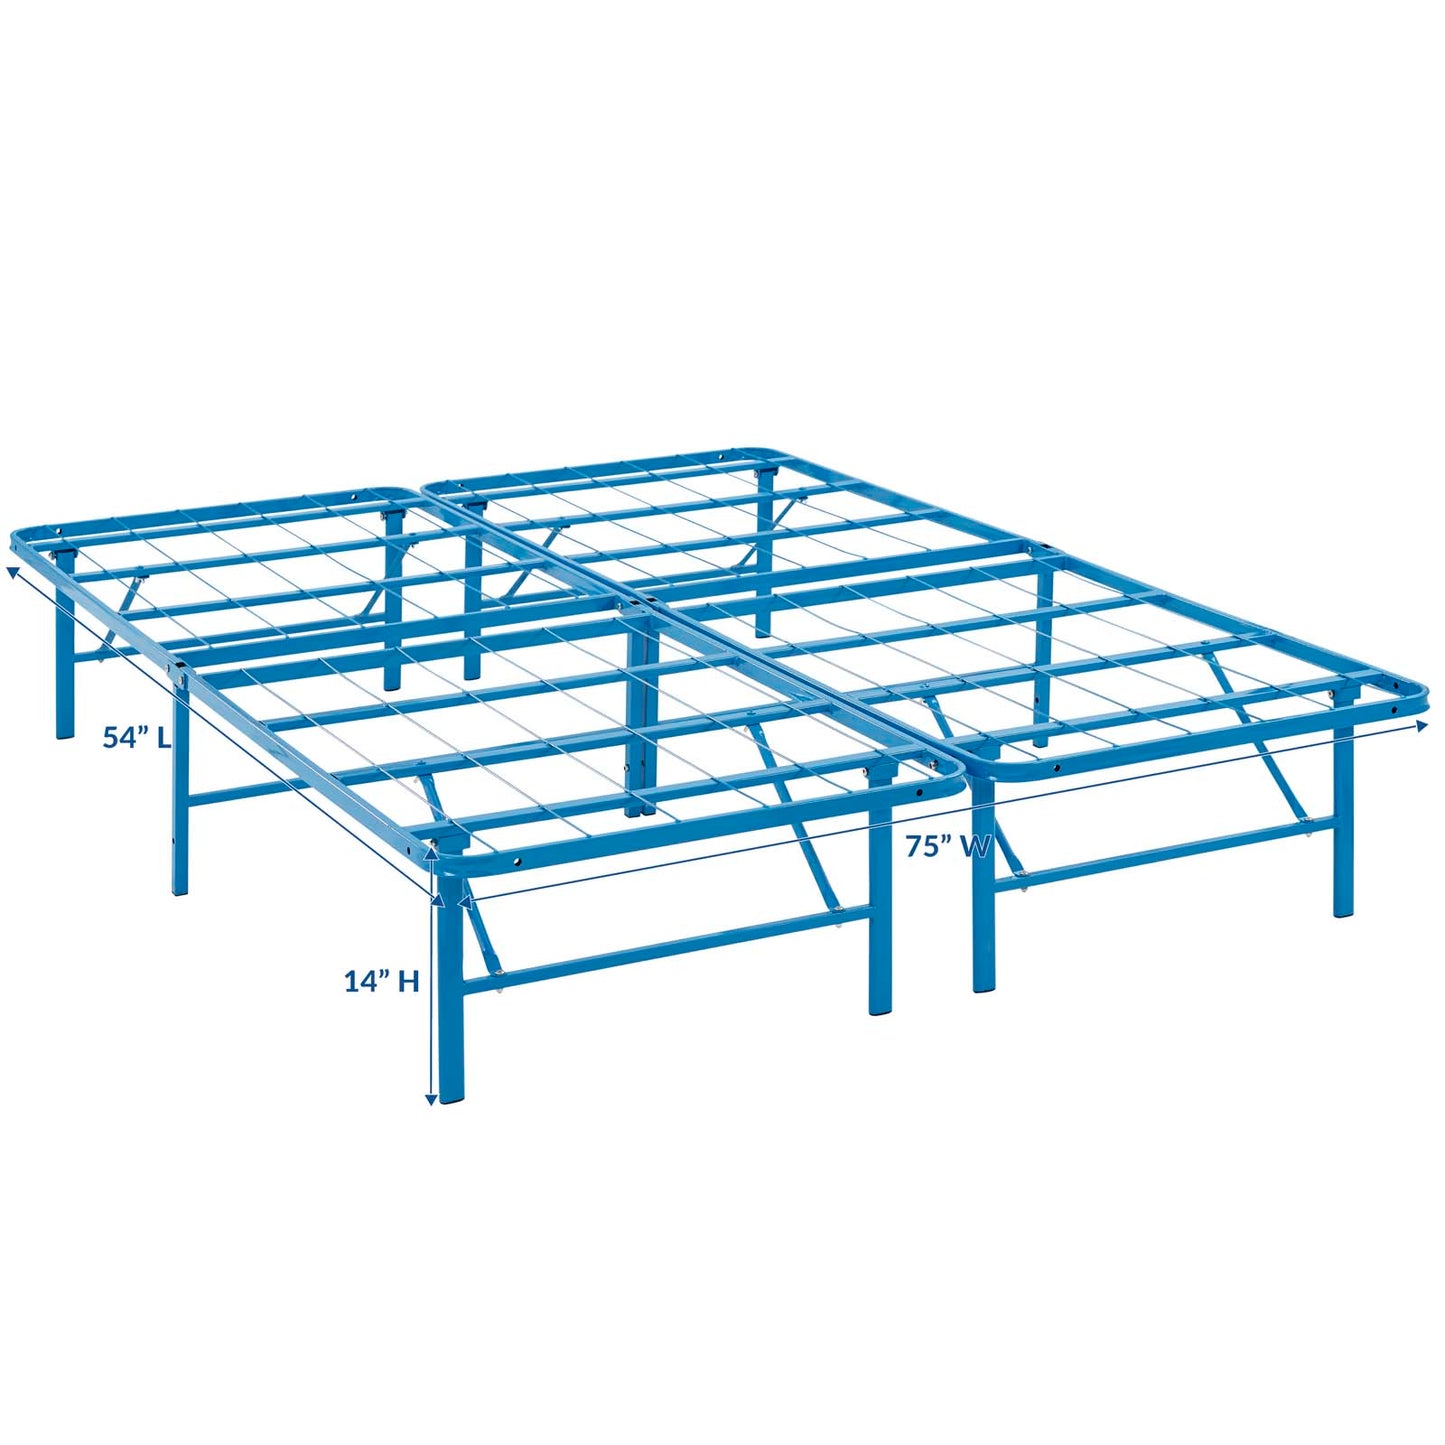 Horizon Full Stainless Steel Bed Frame By Modway - MOD-5428